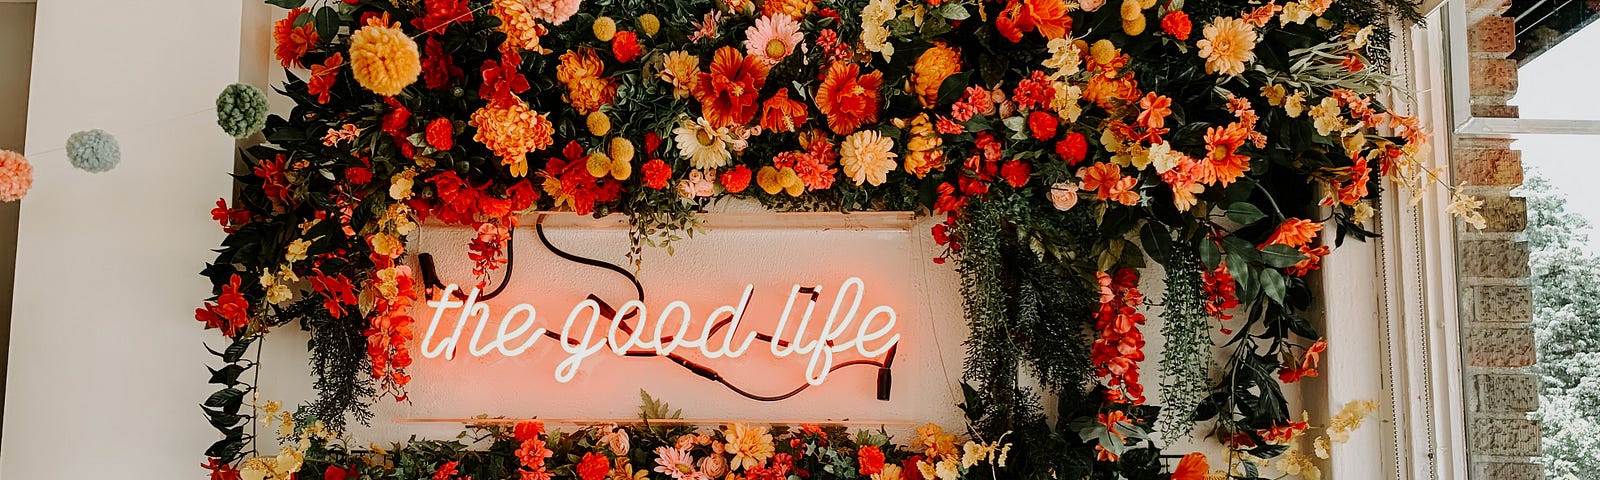 A sign surrounded by flowers at Goldenrod reads “The Good Life”